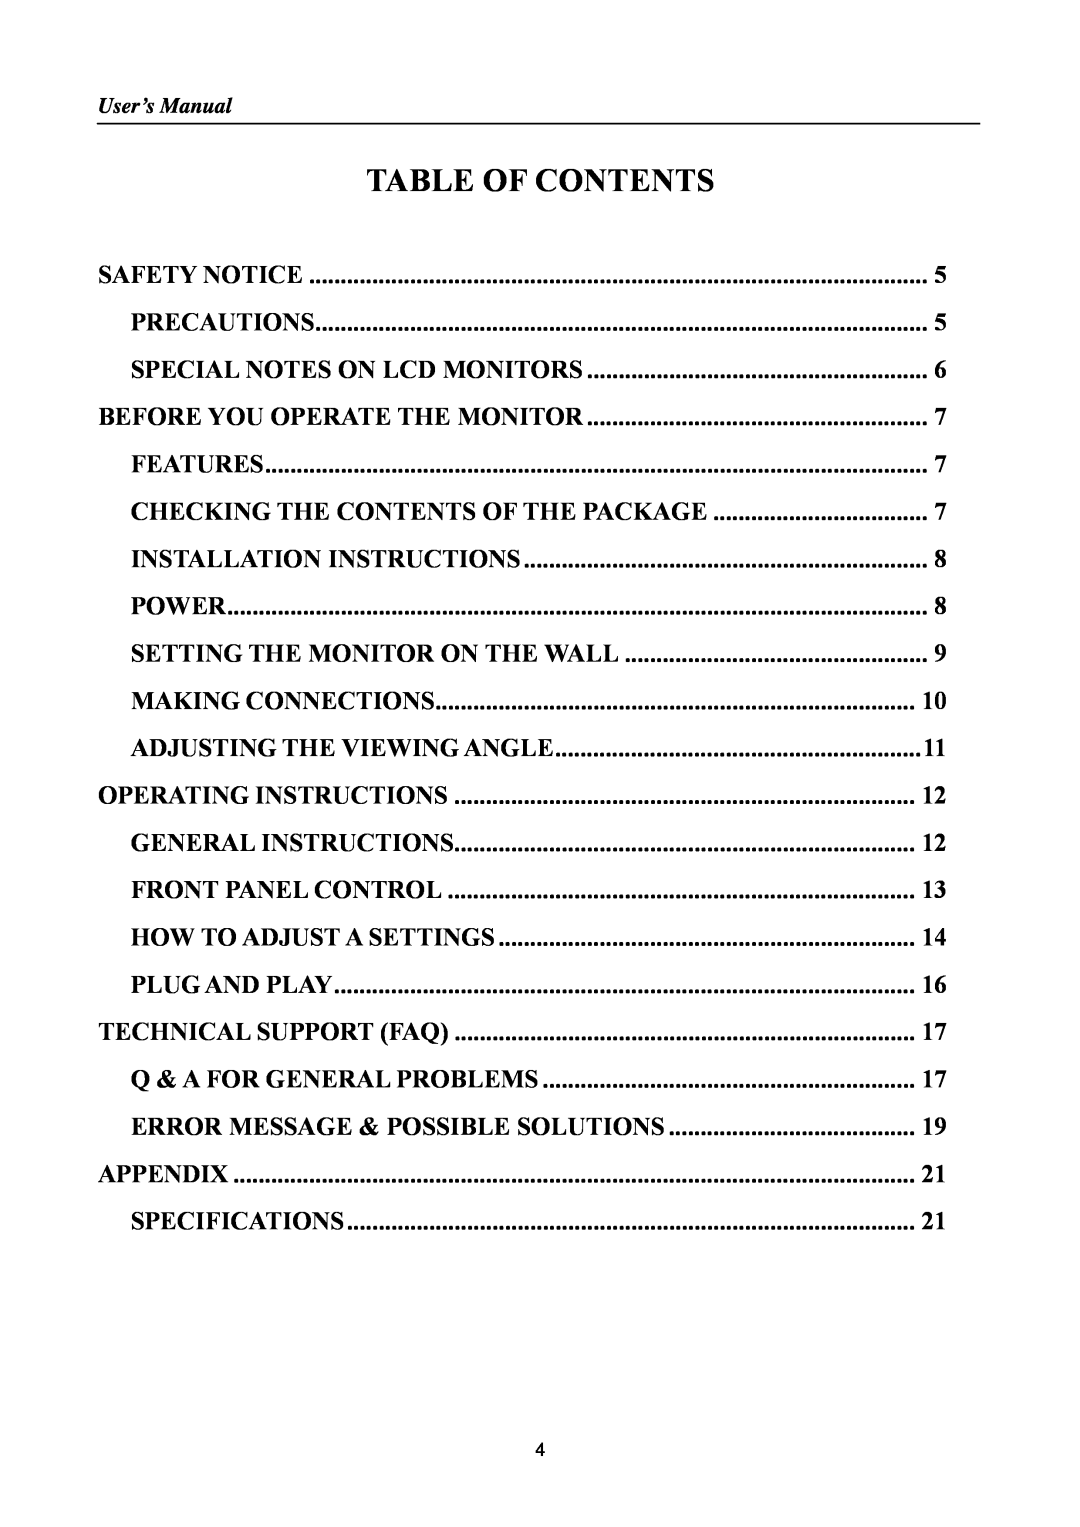 Hanns.G HSG 1155, HS233 manual Table Of Contents, Error Message & Possible Solutions 